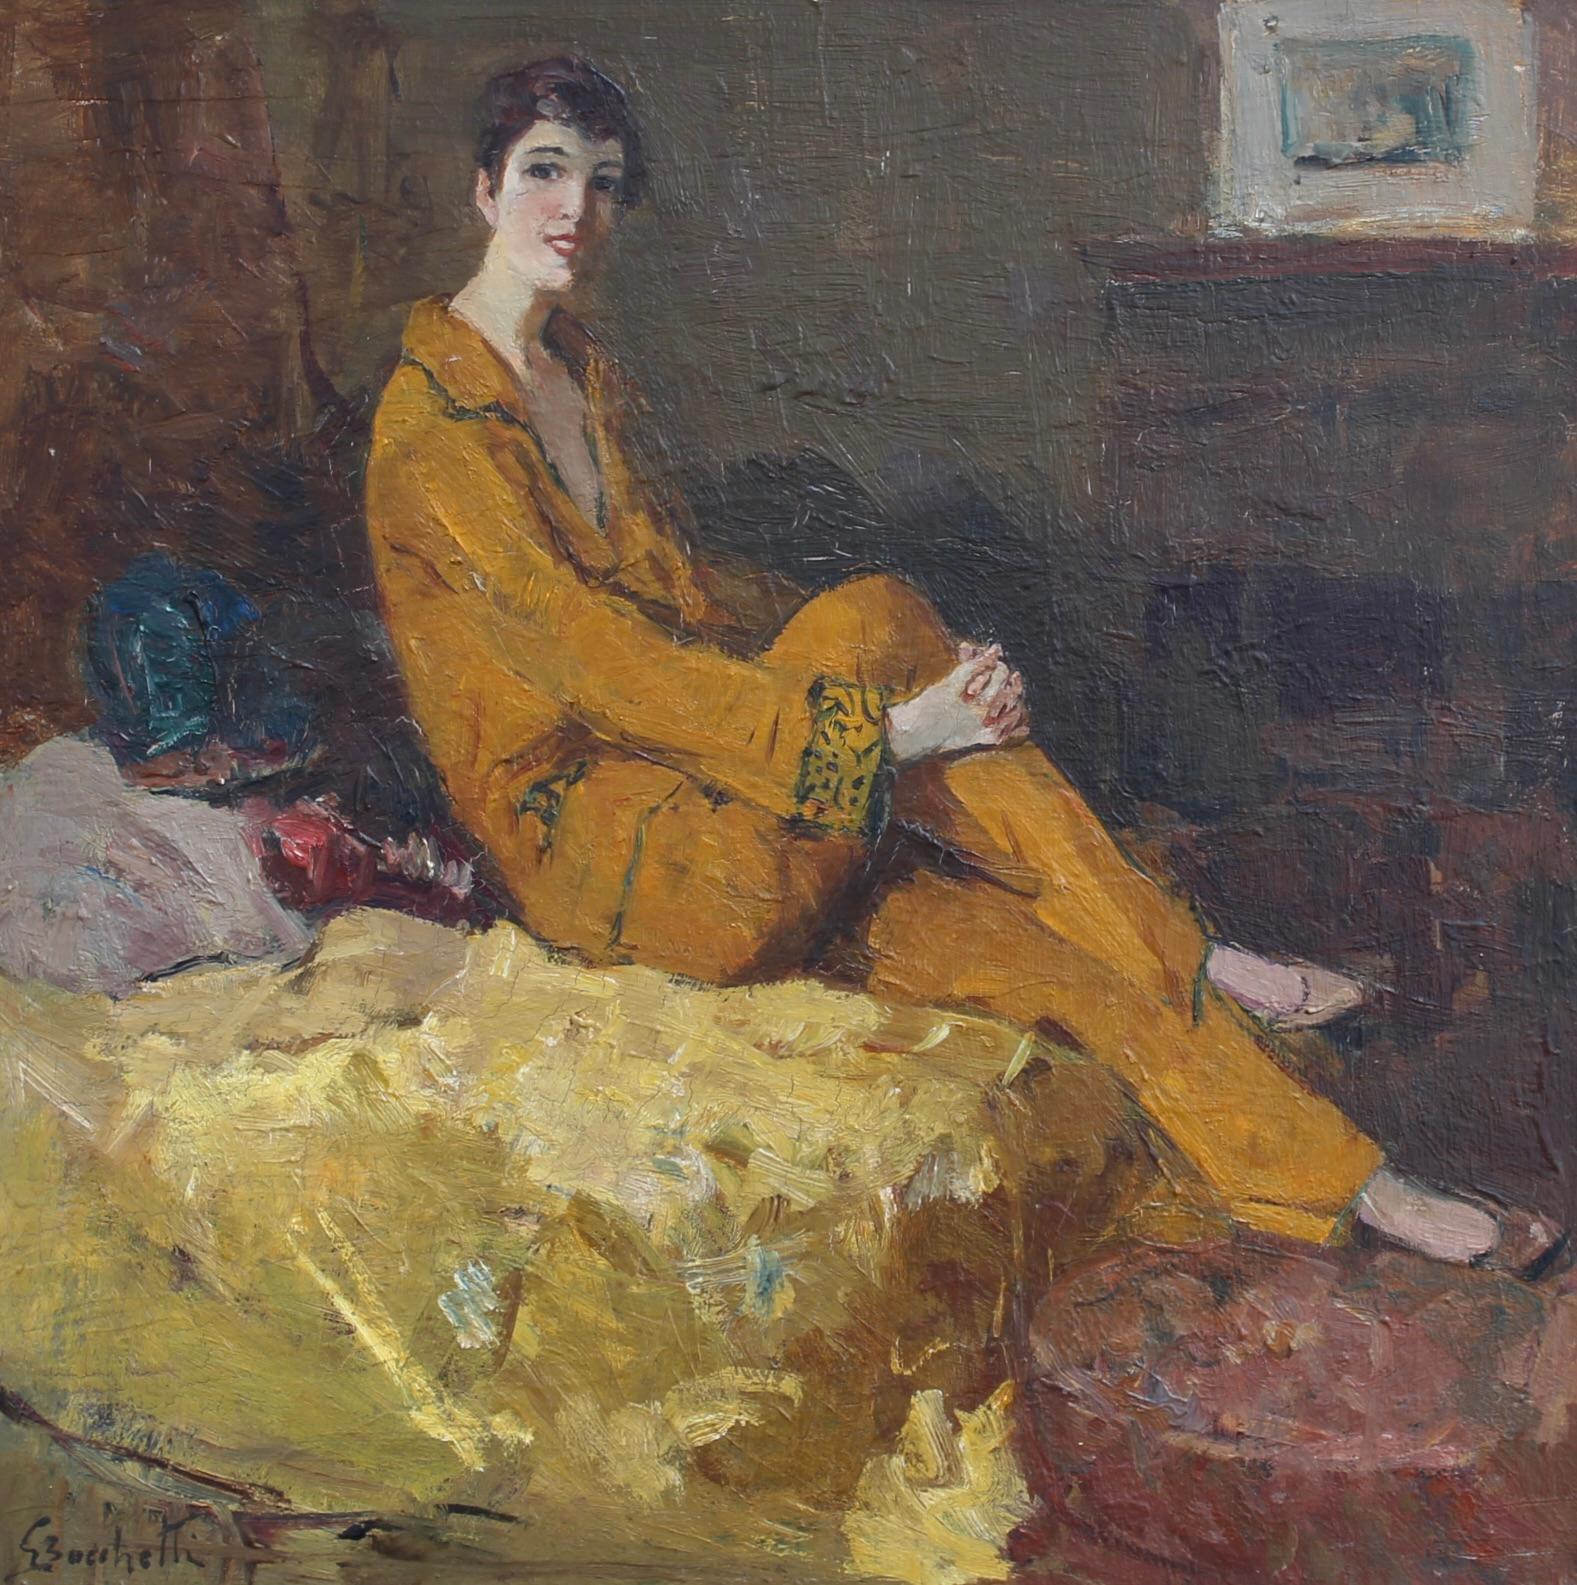 'Elegant Woman in an Interior', oil on panel (circa 1960s), by Gaetano Bocchetti. This painting captures its subject, an elegantly presented woman in her night clothes and indoor slippers glancing towards the viewer with a sense of serene